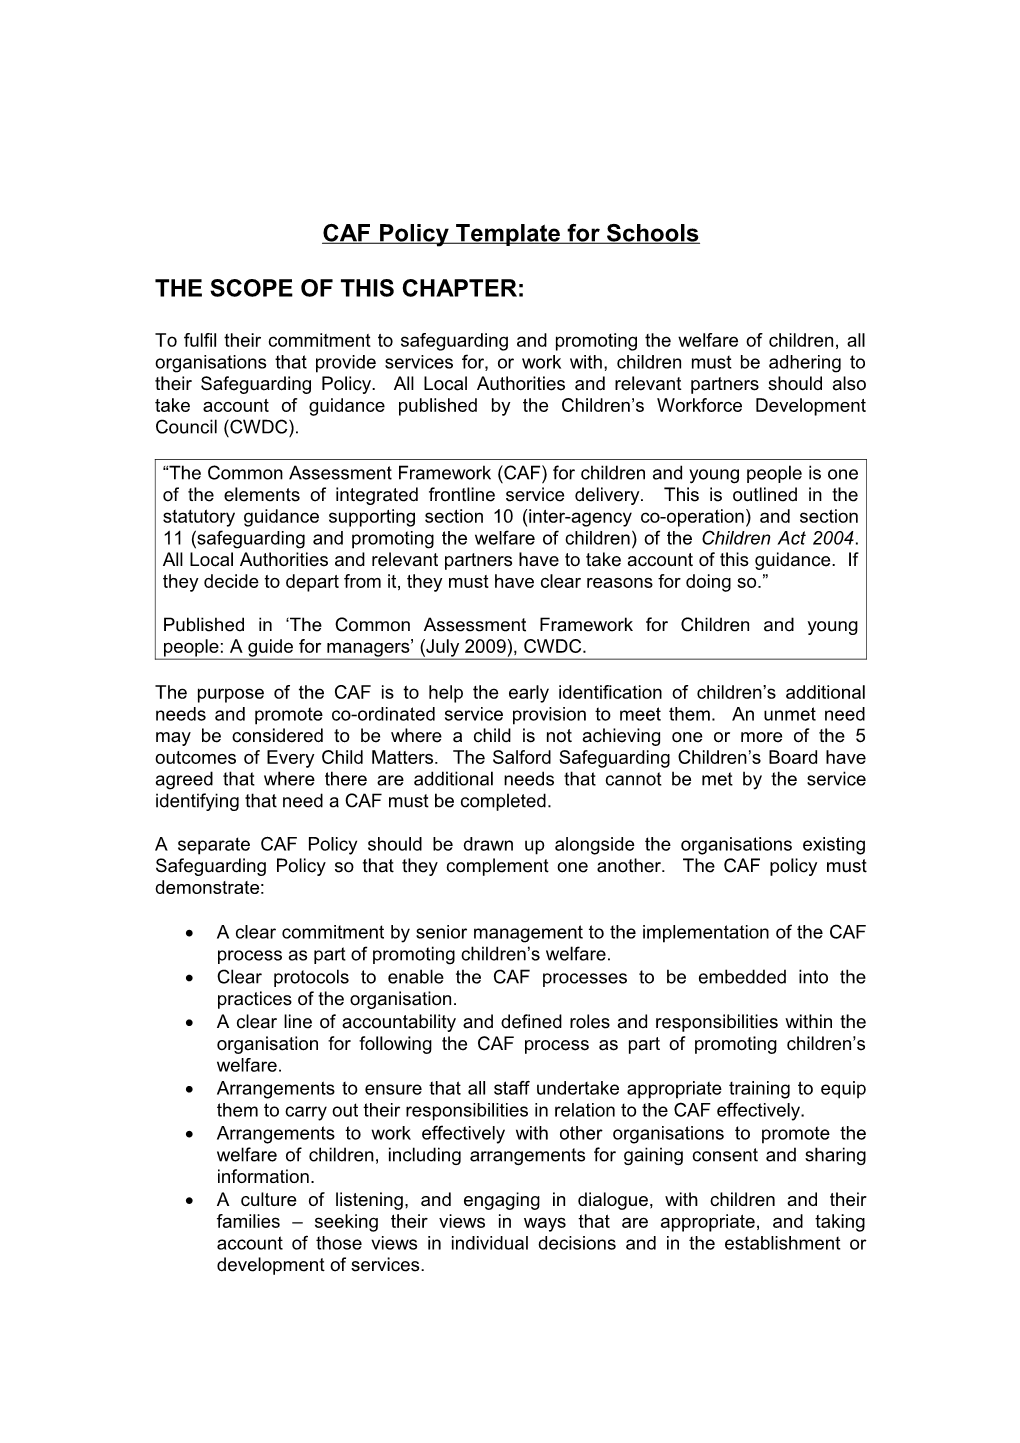 CAF Policy Template for Schools, Voluntary Organisations